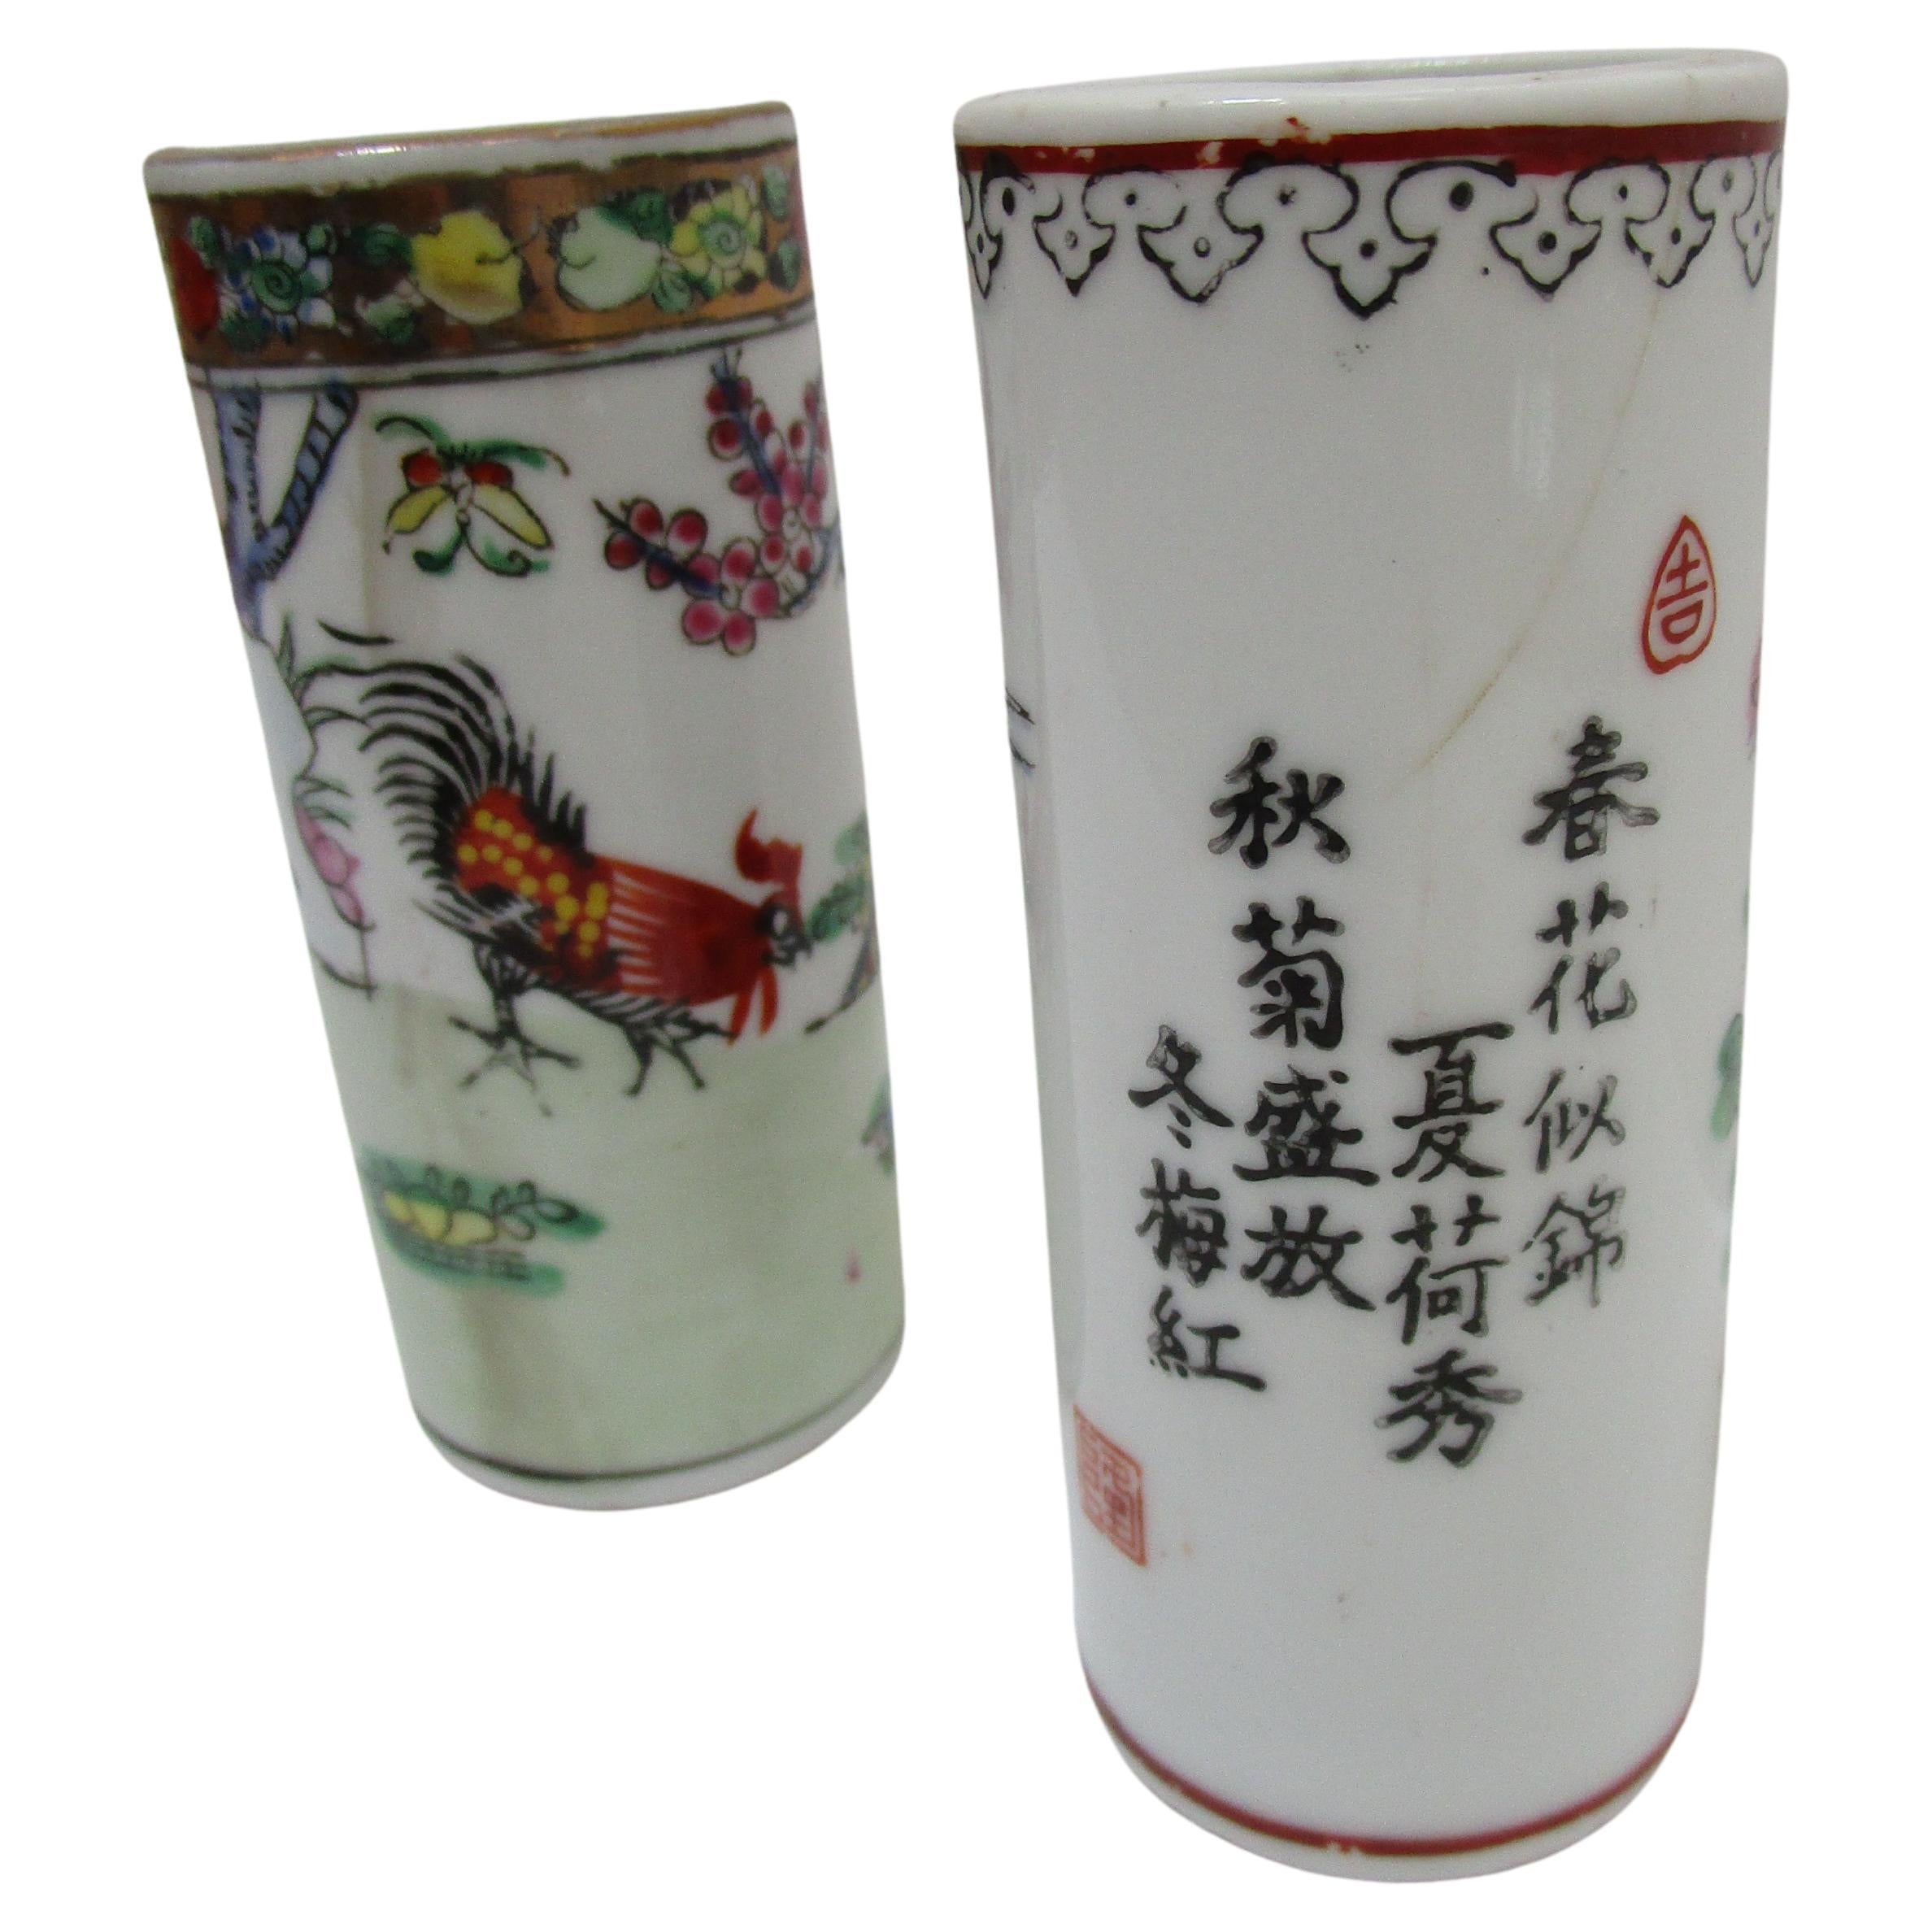 Pair of Famille Rose Antique Cylindrical Brush Pots with Two-Verse Poem